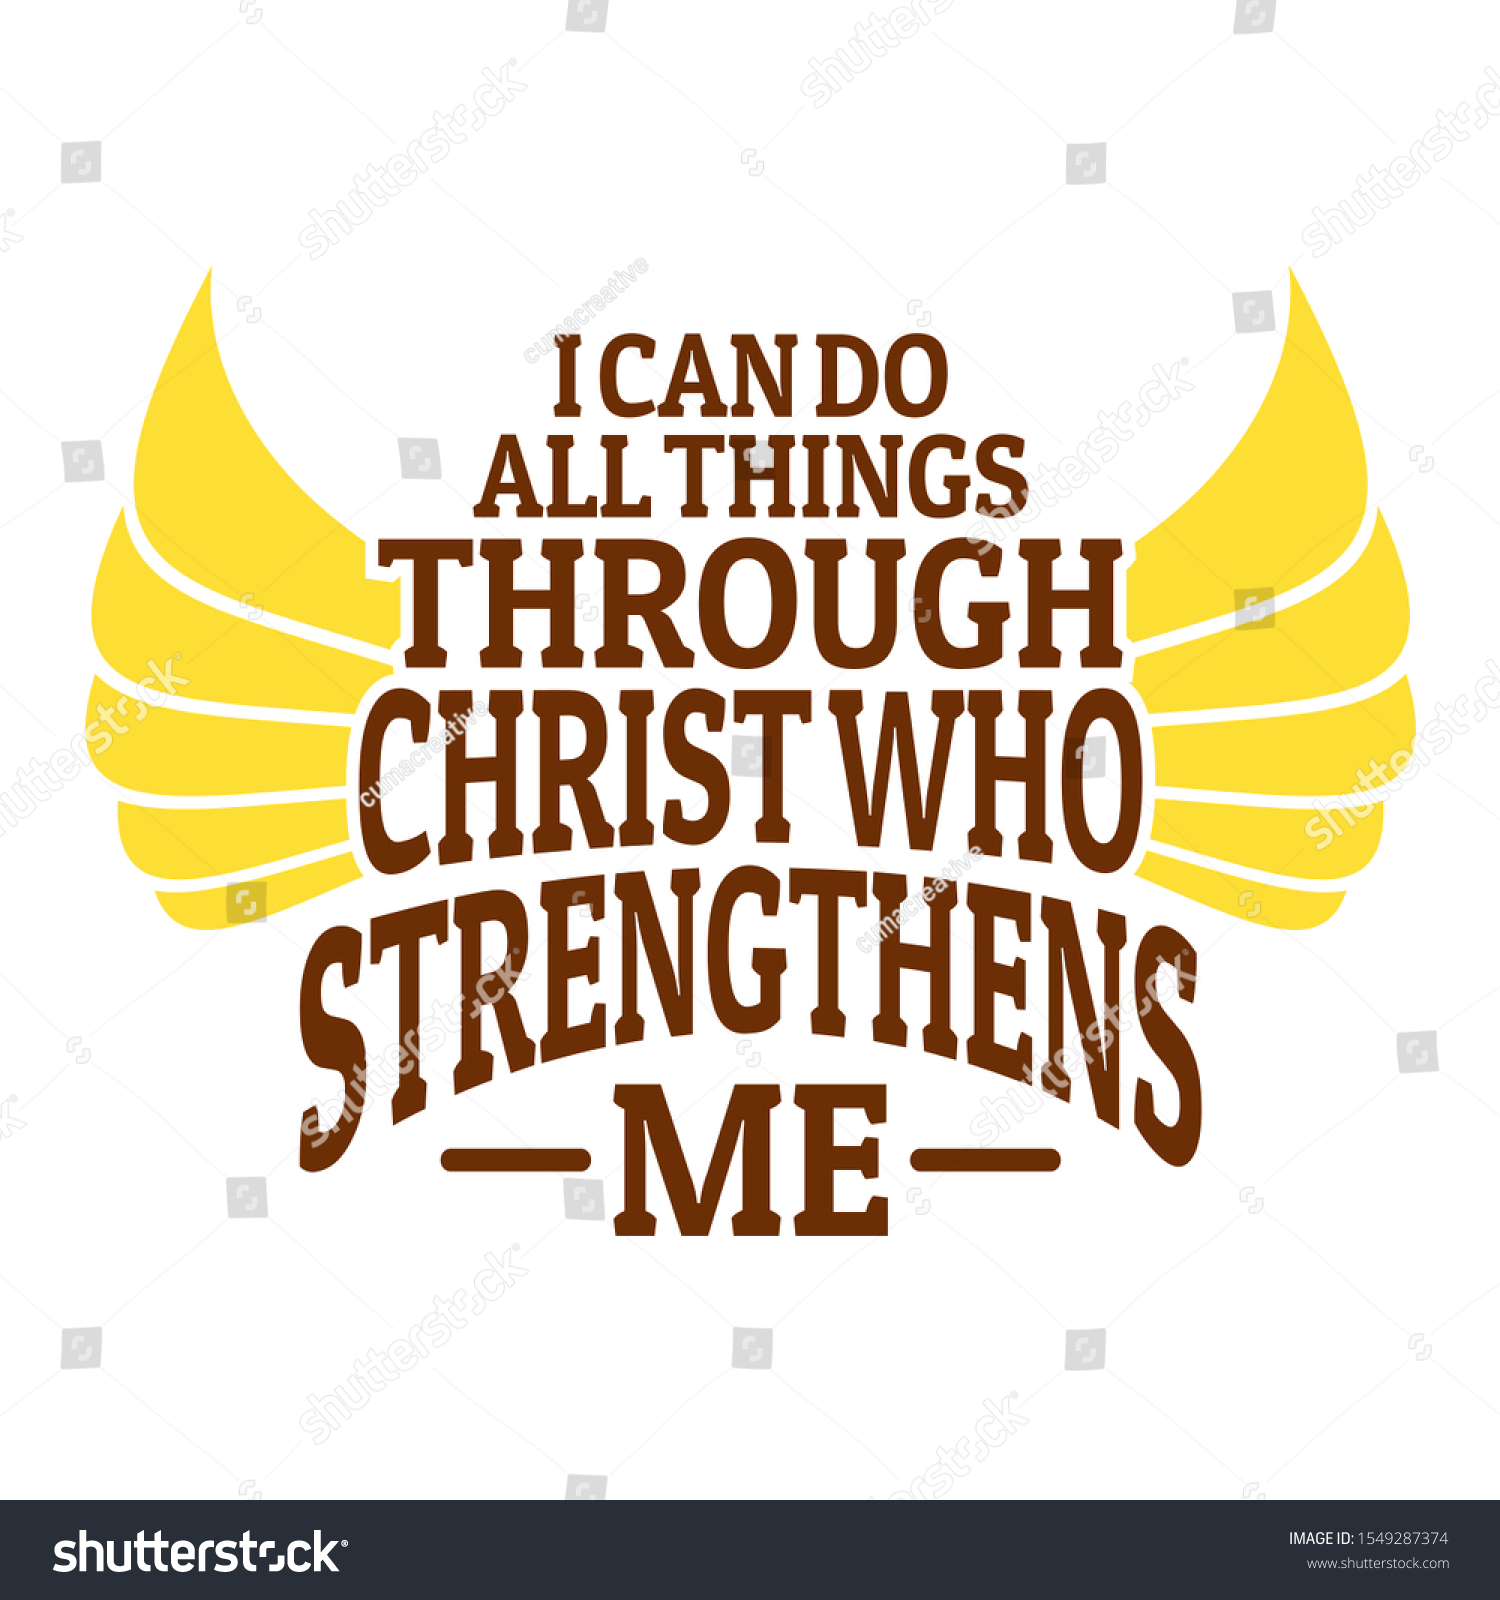 SVG of Eagle in the bible - I can do all things through christ who strengthens me - the will soar on wings like eagles svg